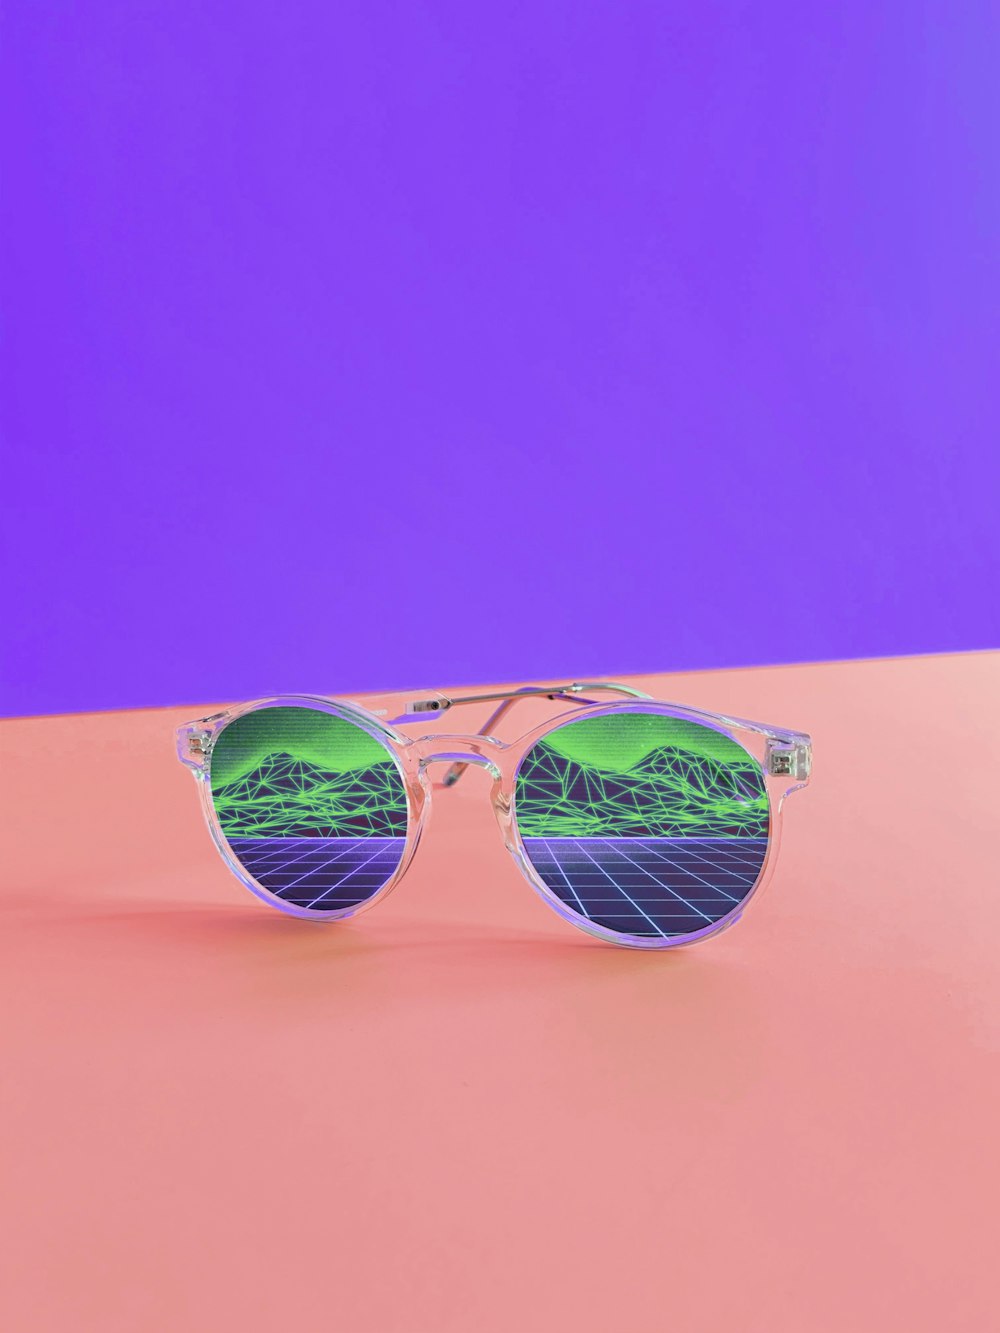 white framed sunglasses close-up photography